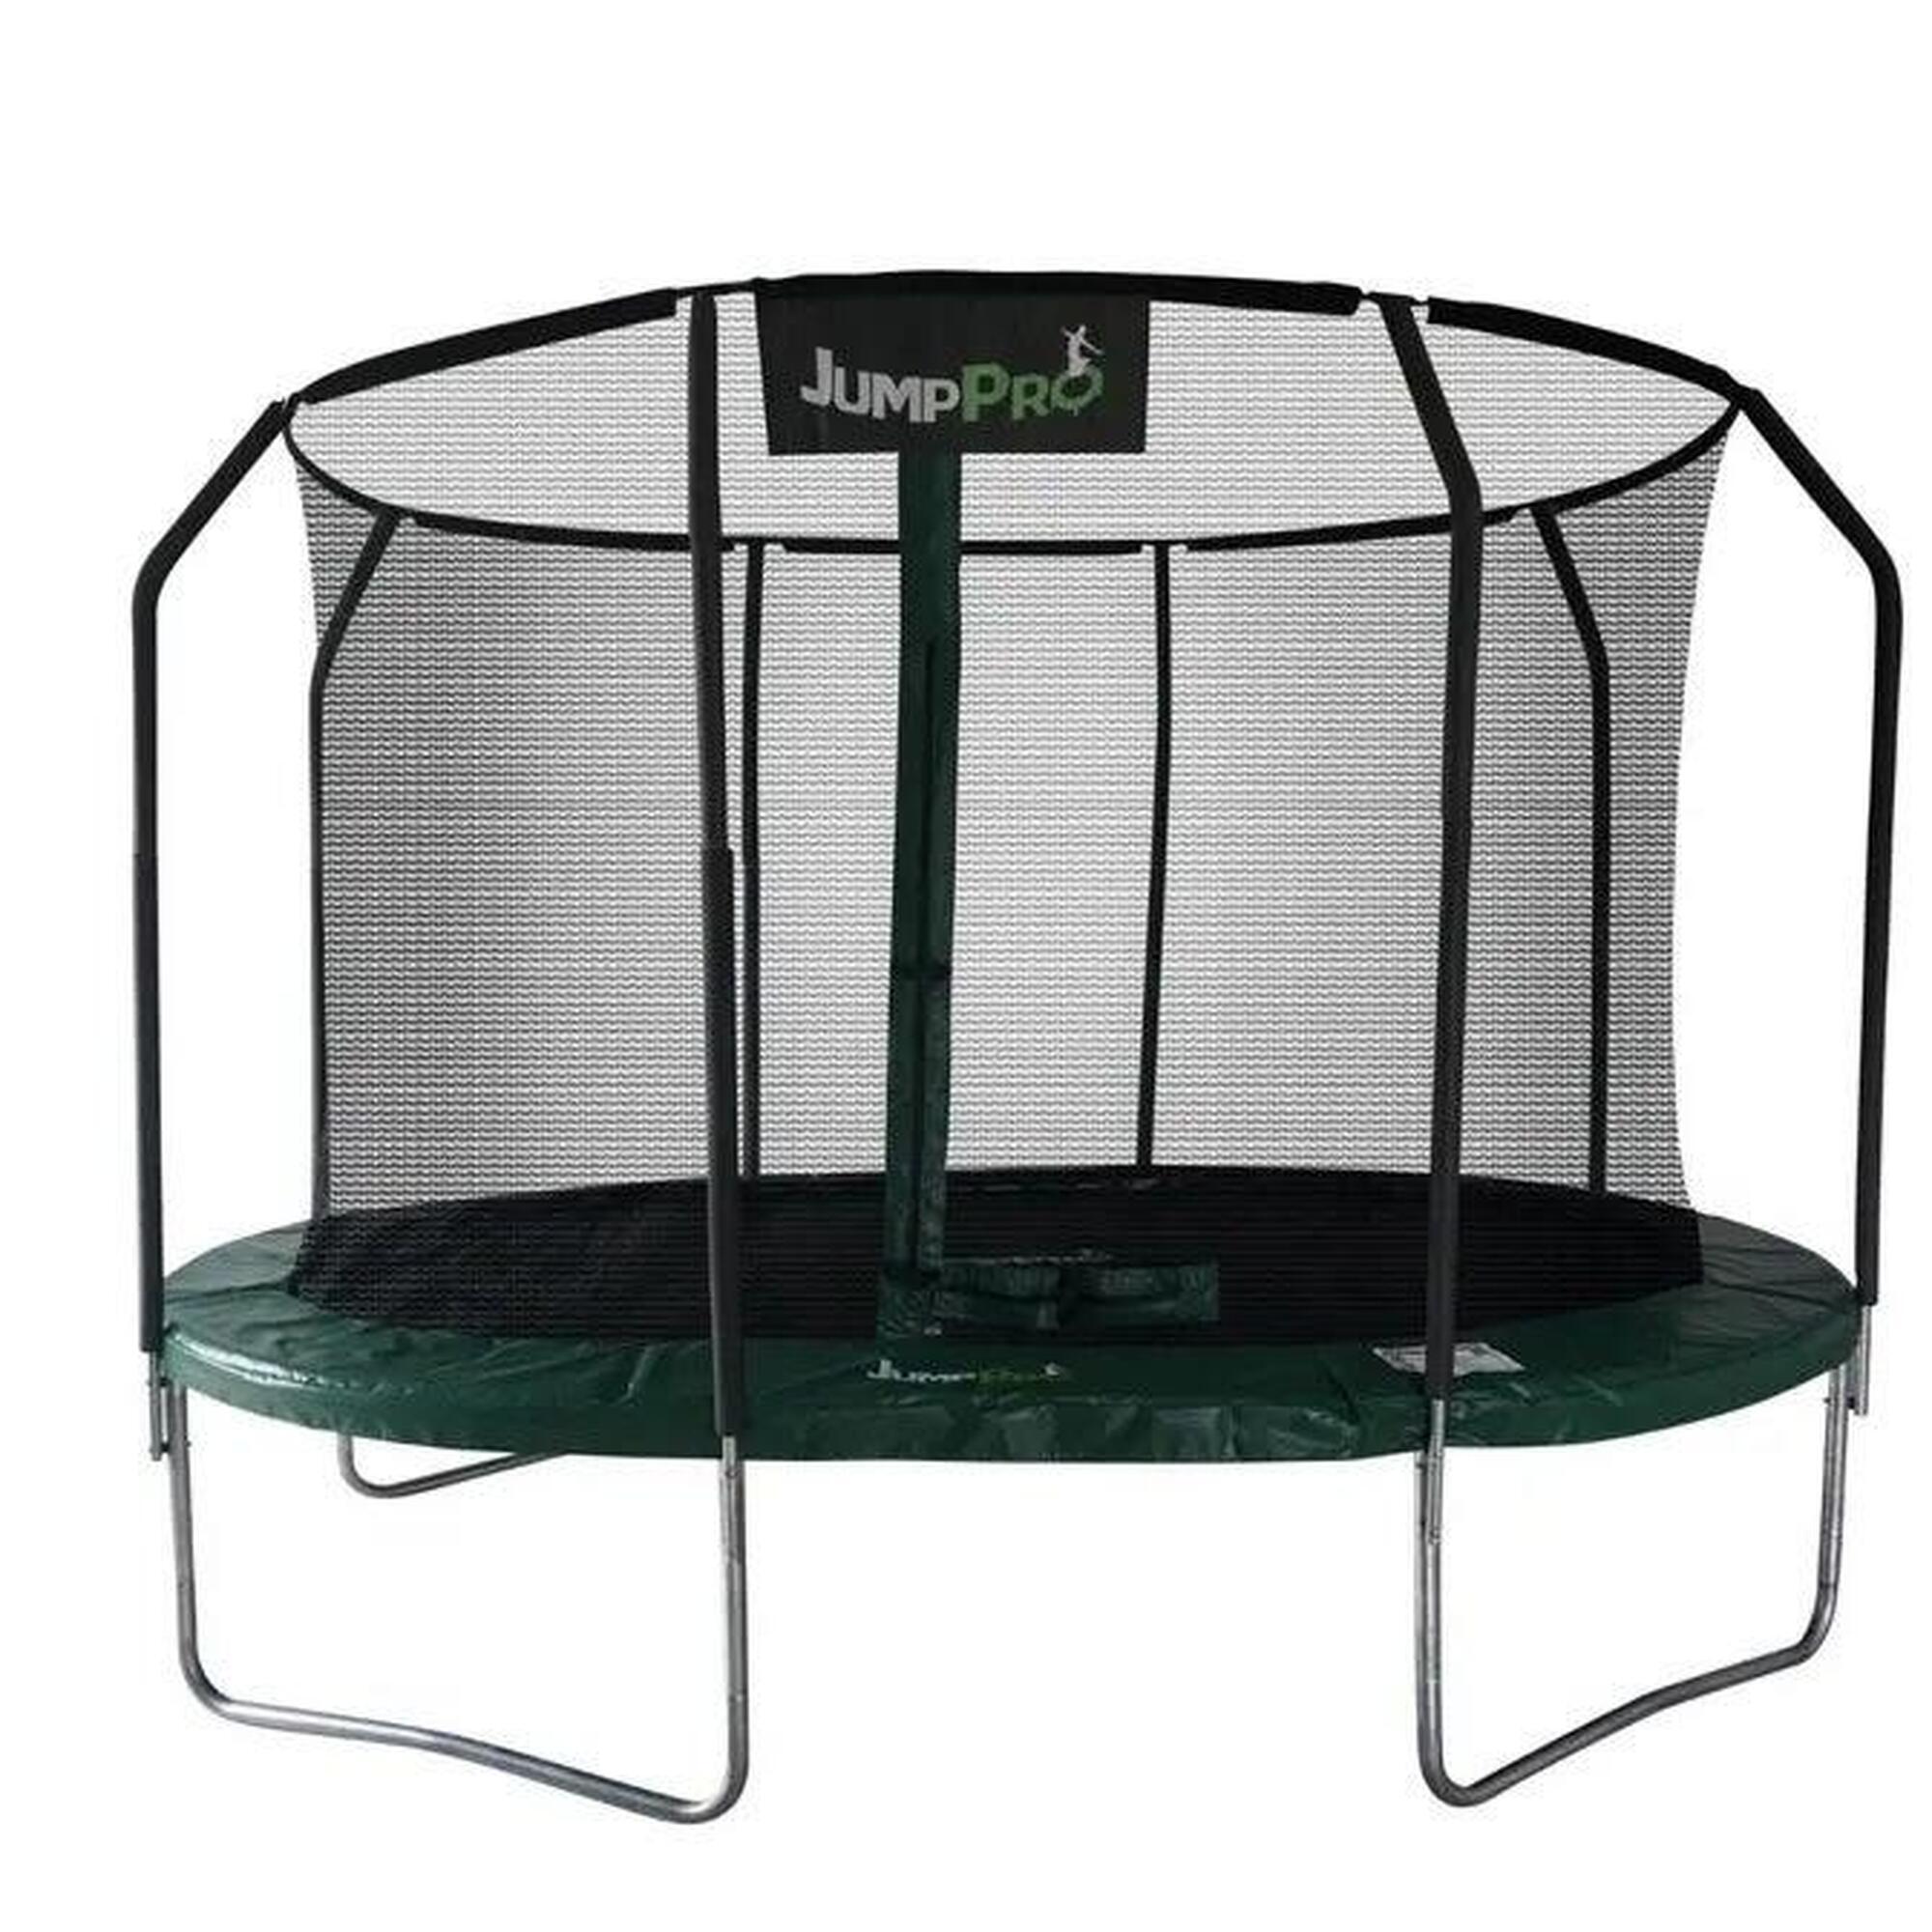 JUMPPRO 15ft x 10ft JumpPRO™ Xcite Green Oval Trampoline with Enclosure